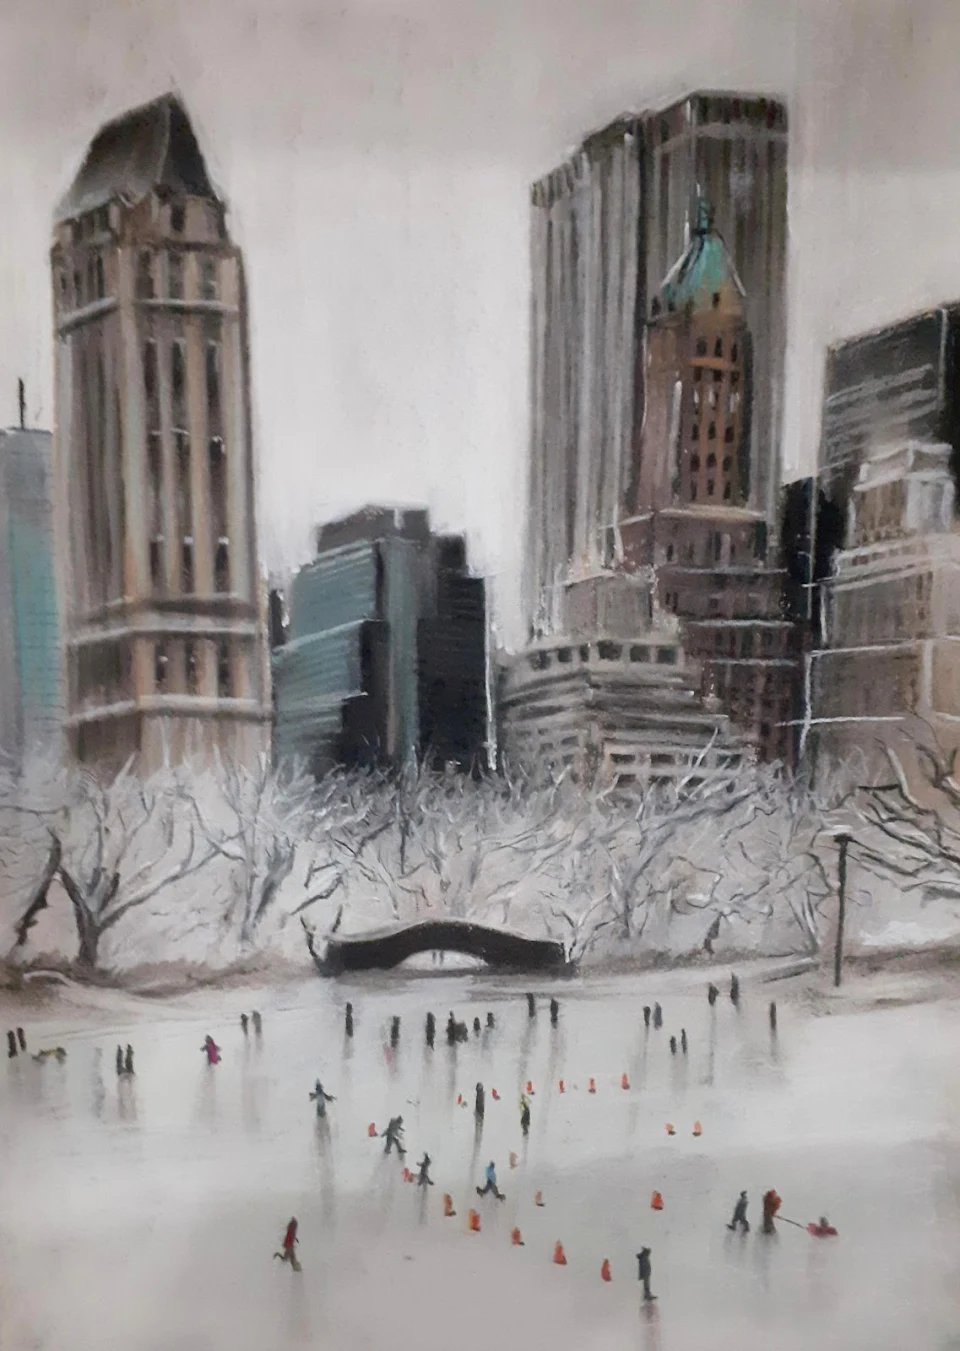 Ice skating in central park, pastel art by me, 2022.